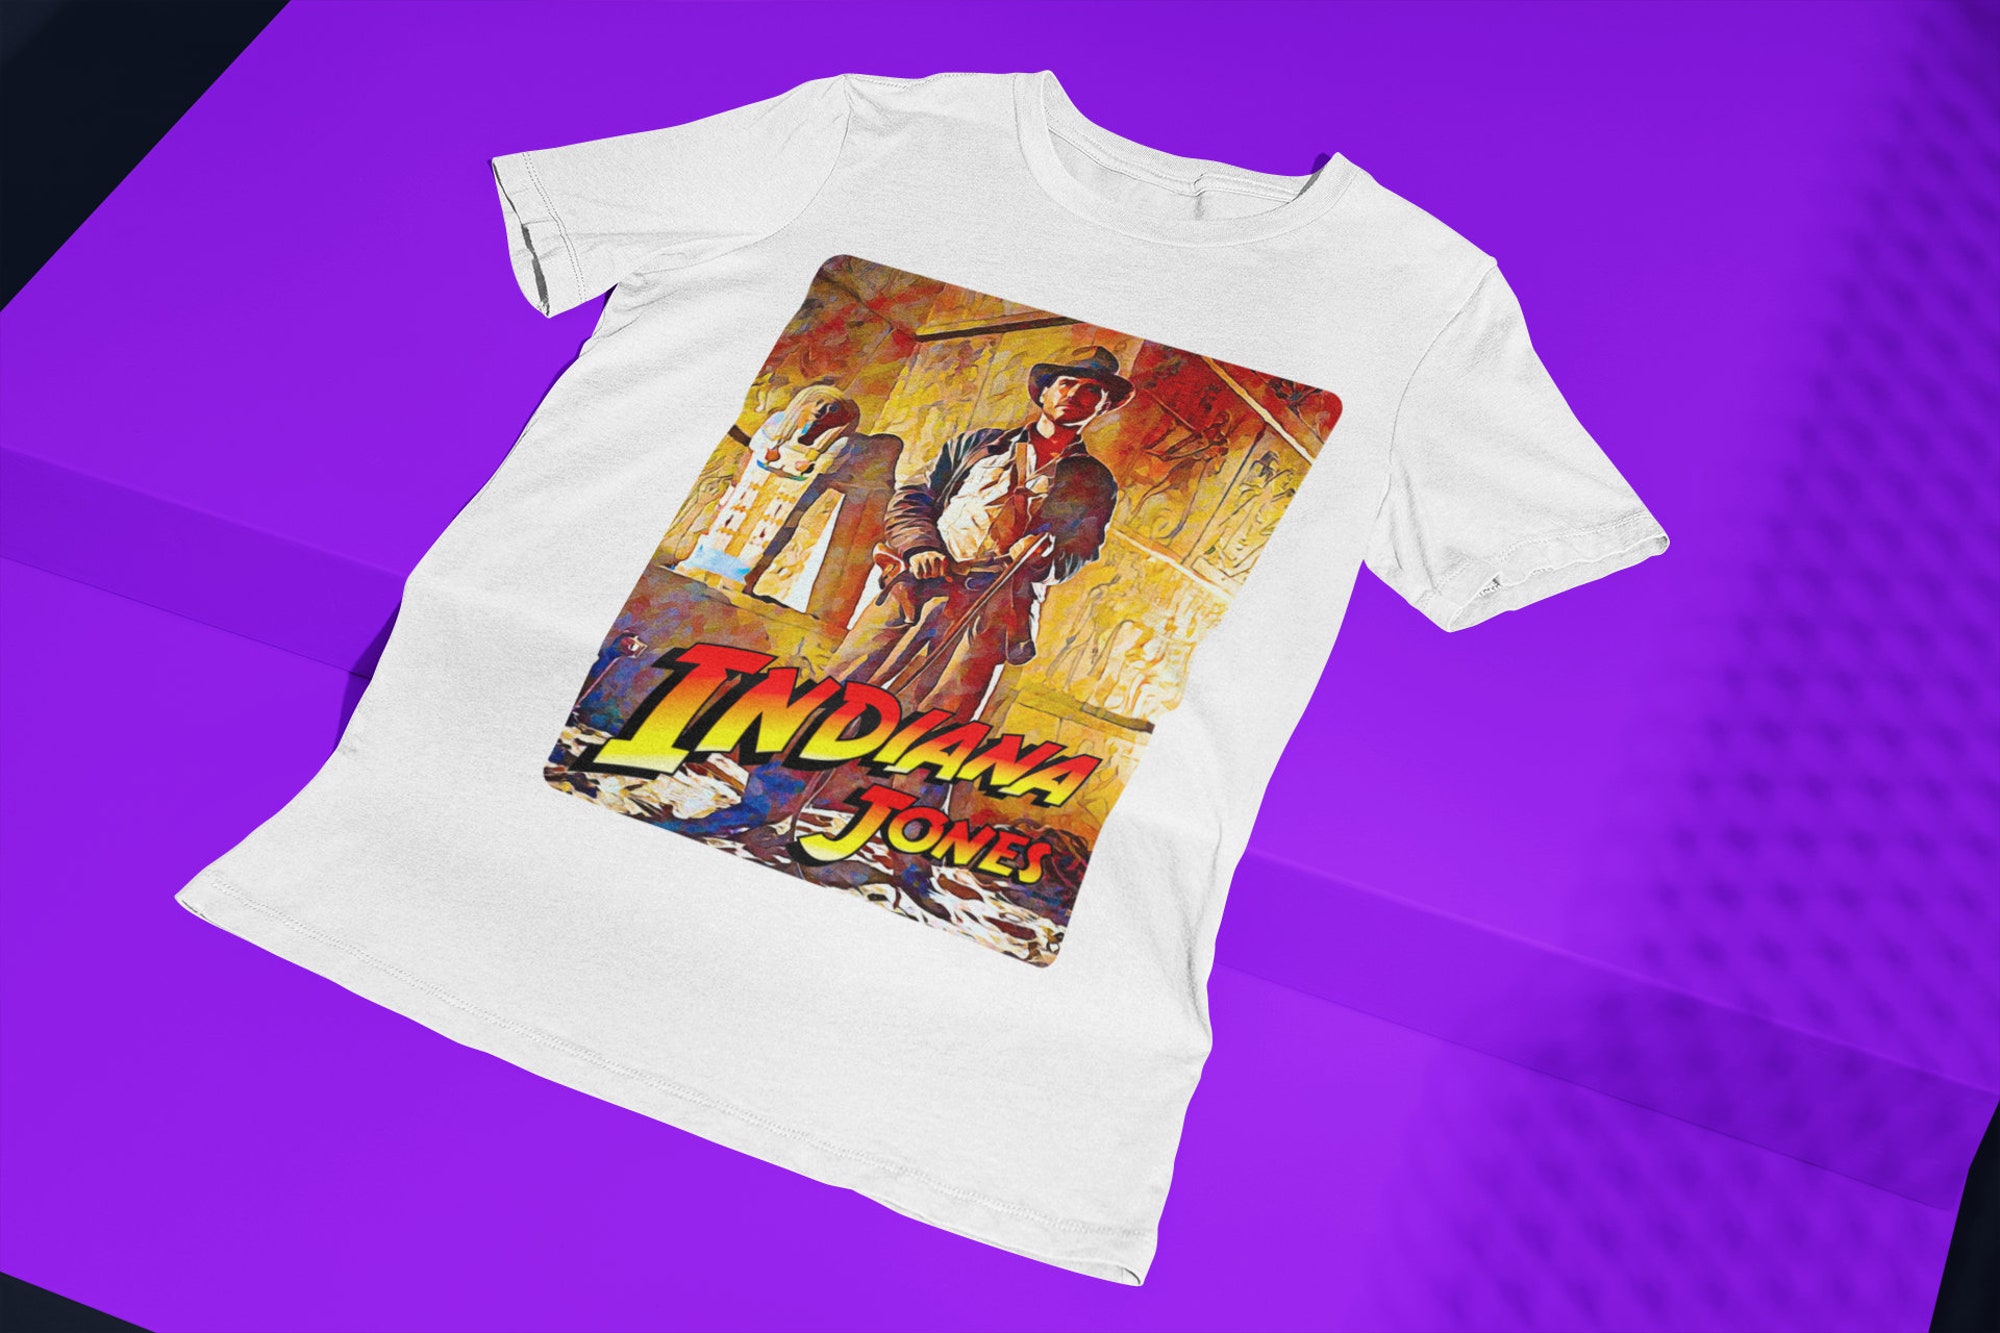 Discover Indiana Jones Movie Soft T-Shirt, Indiana Jones Raiders of the Lost Ark Poster T Shirt